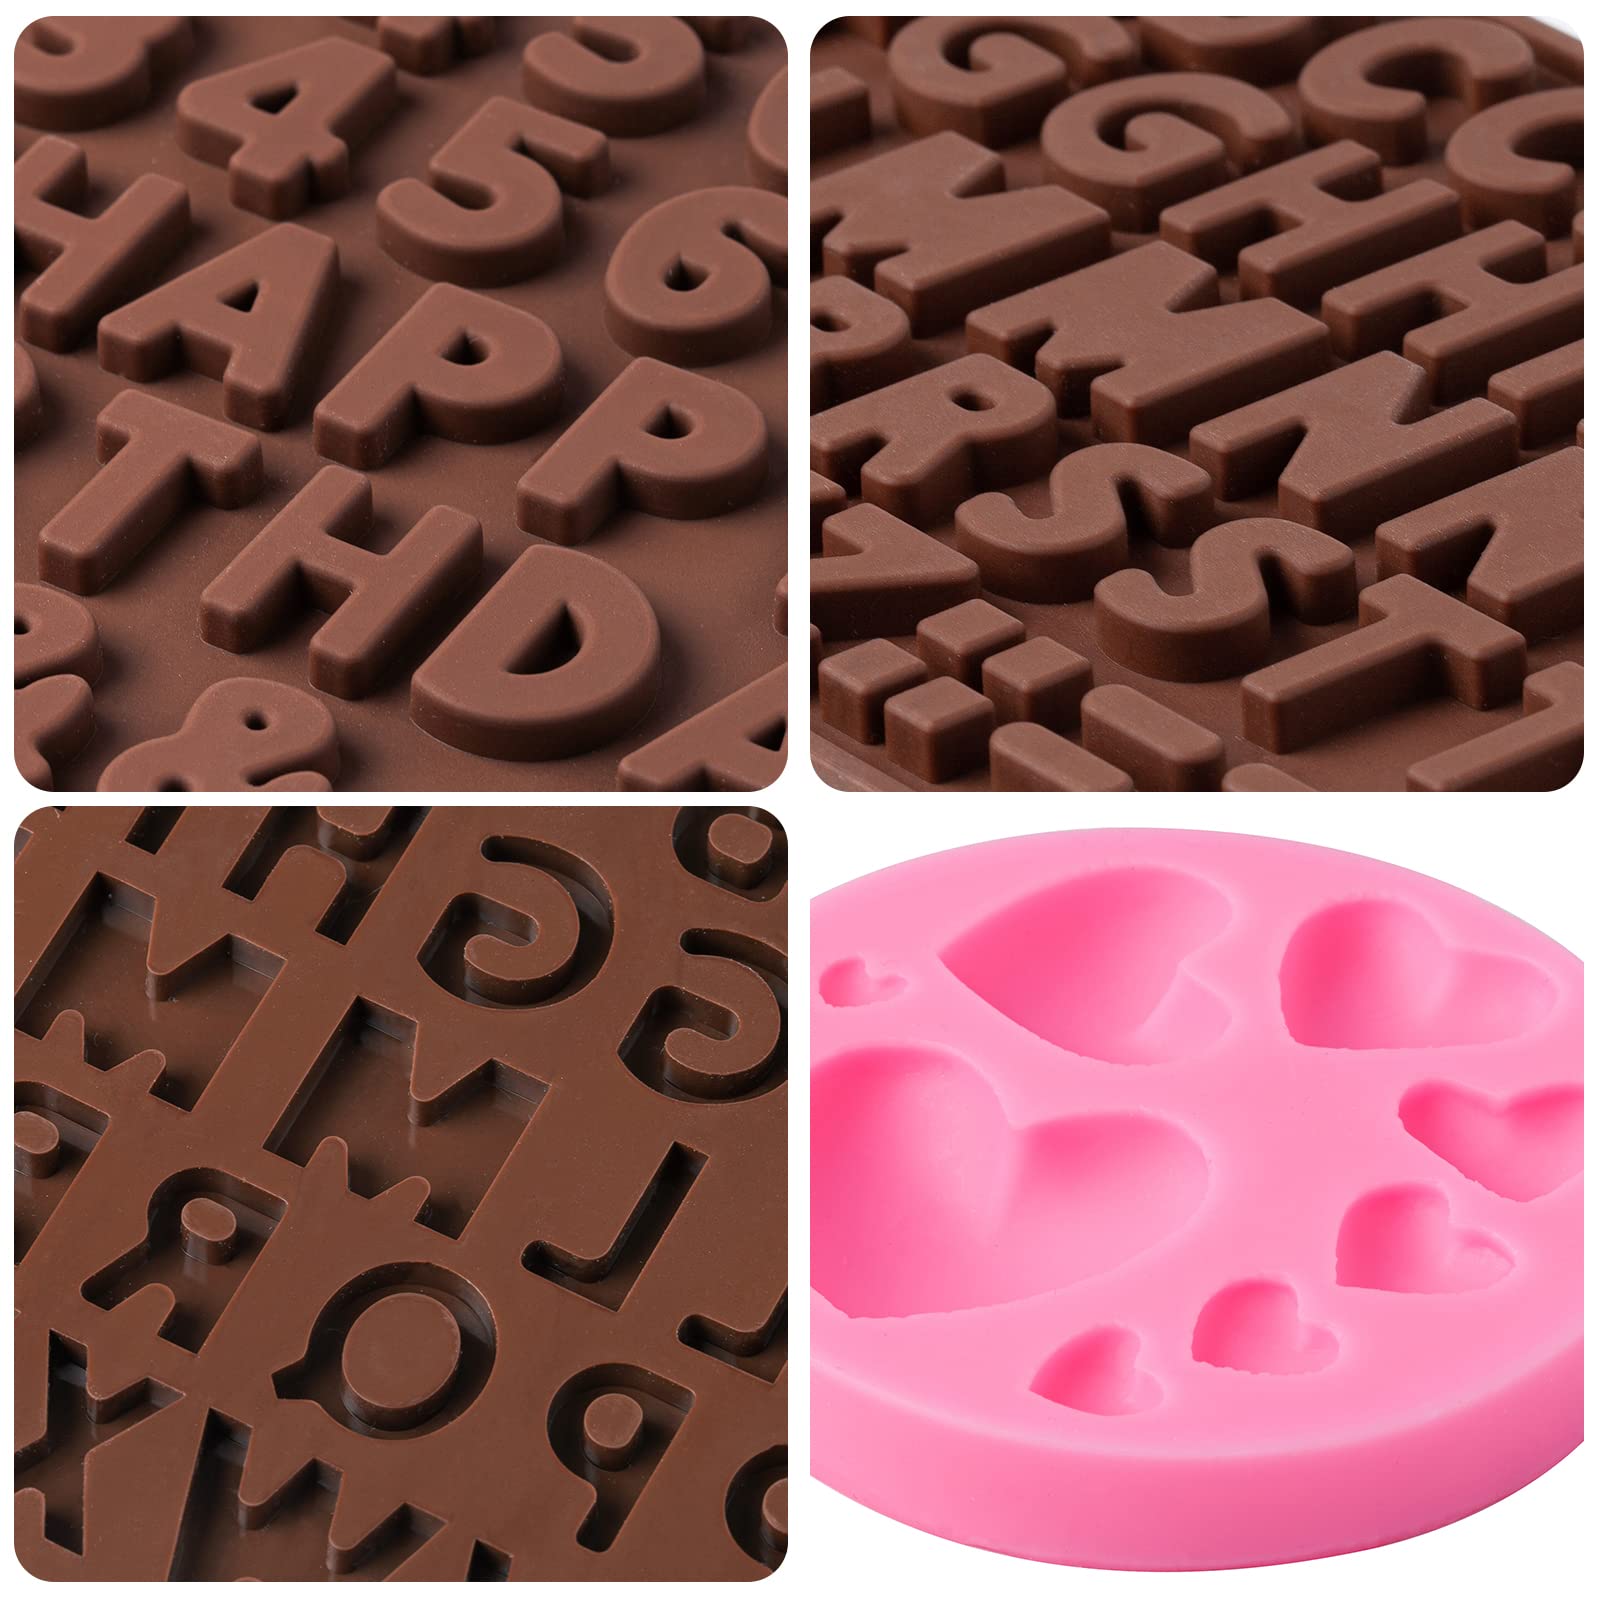 Alphabet Letters Mold Cake Mold Mould Silicone Mold Biscuit Mold Chocolate  Mold Soap Mold | Fondant silicone molds, Alphabet cake, Soap molds silicone